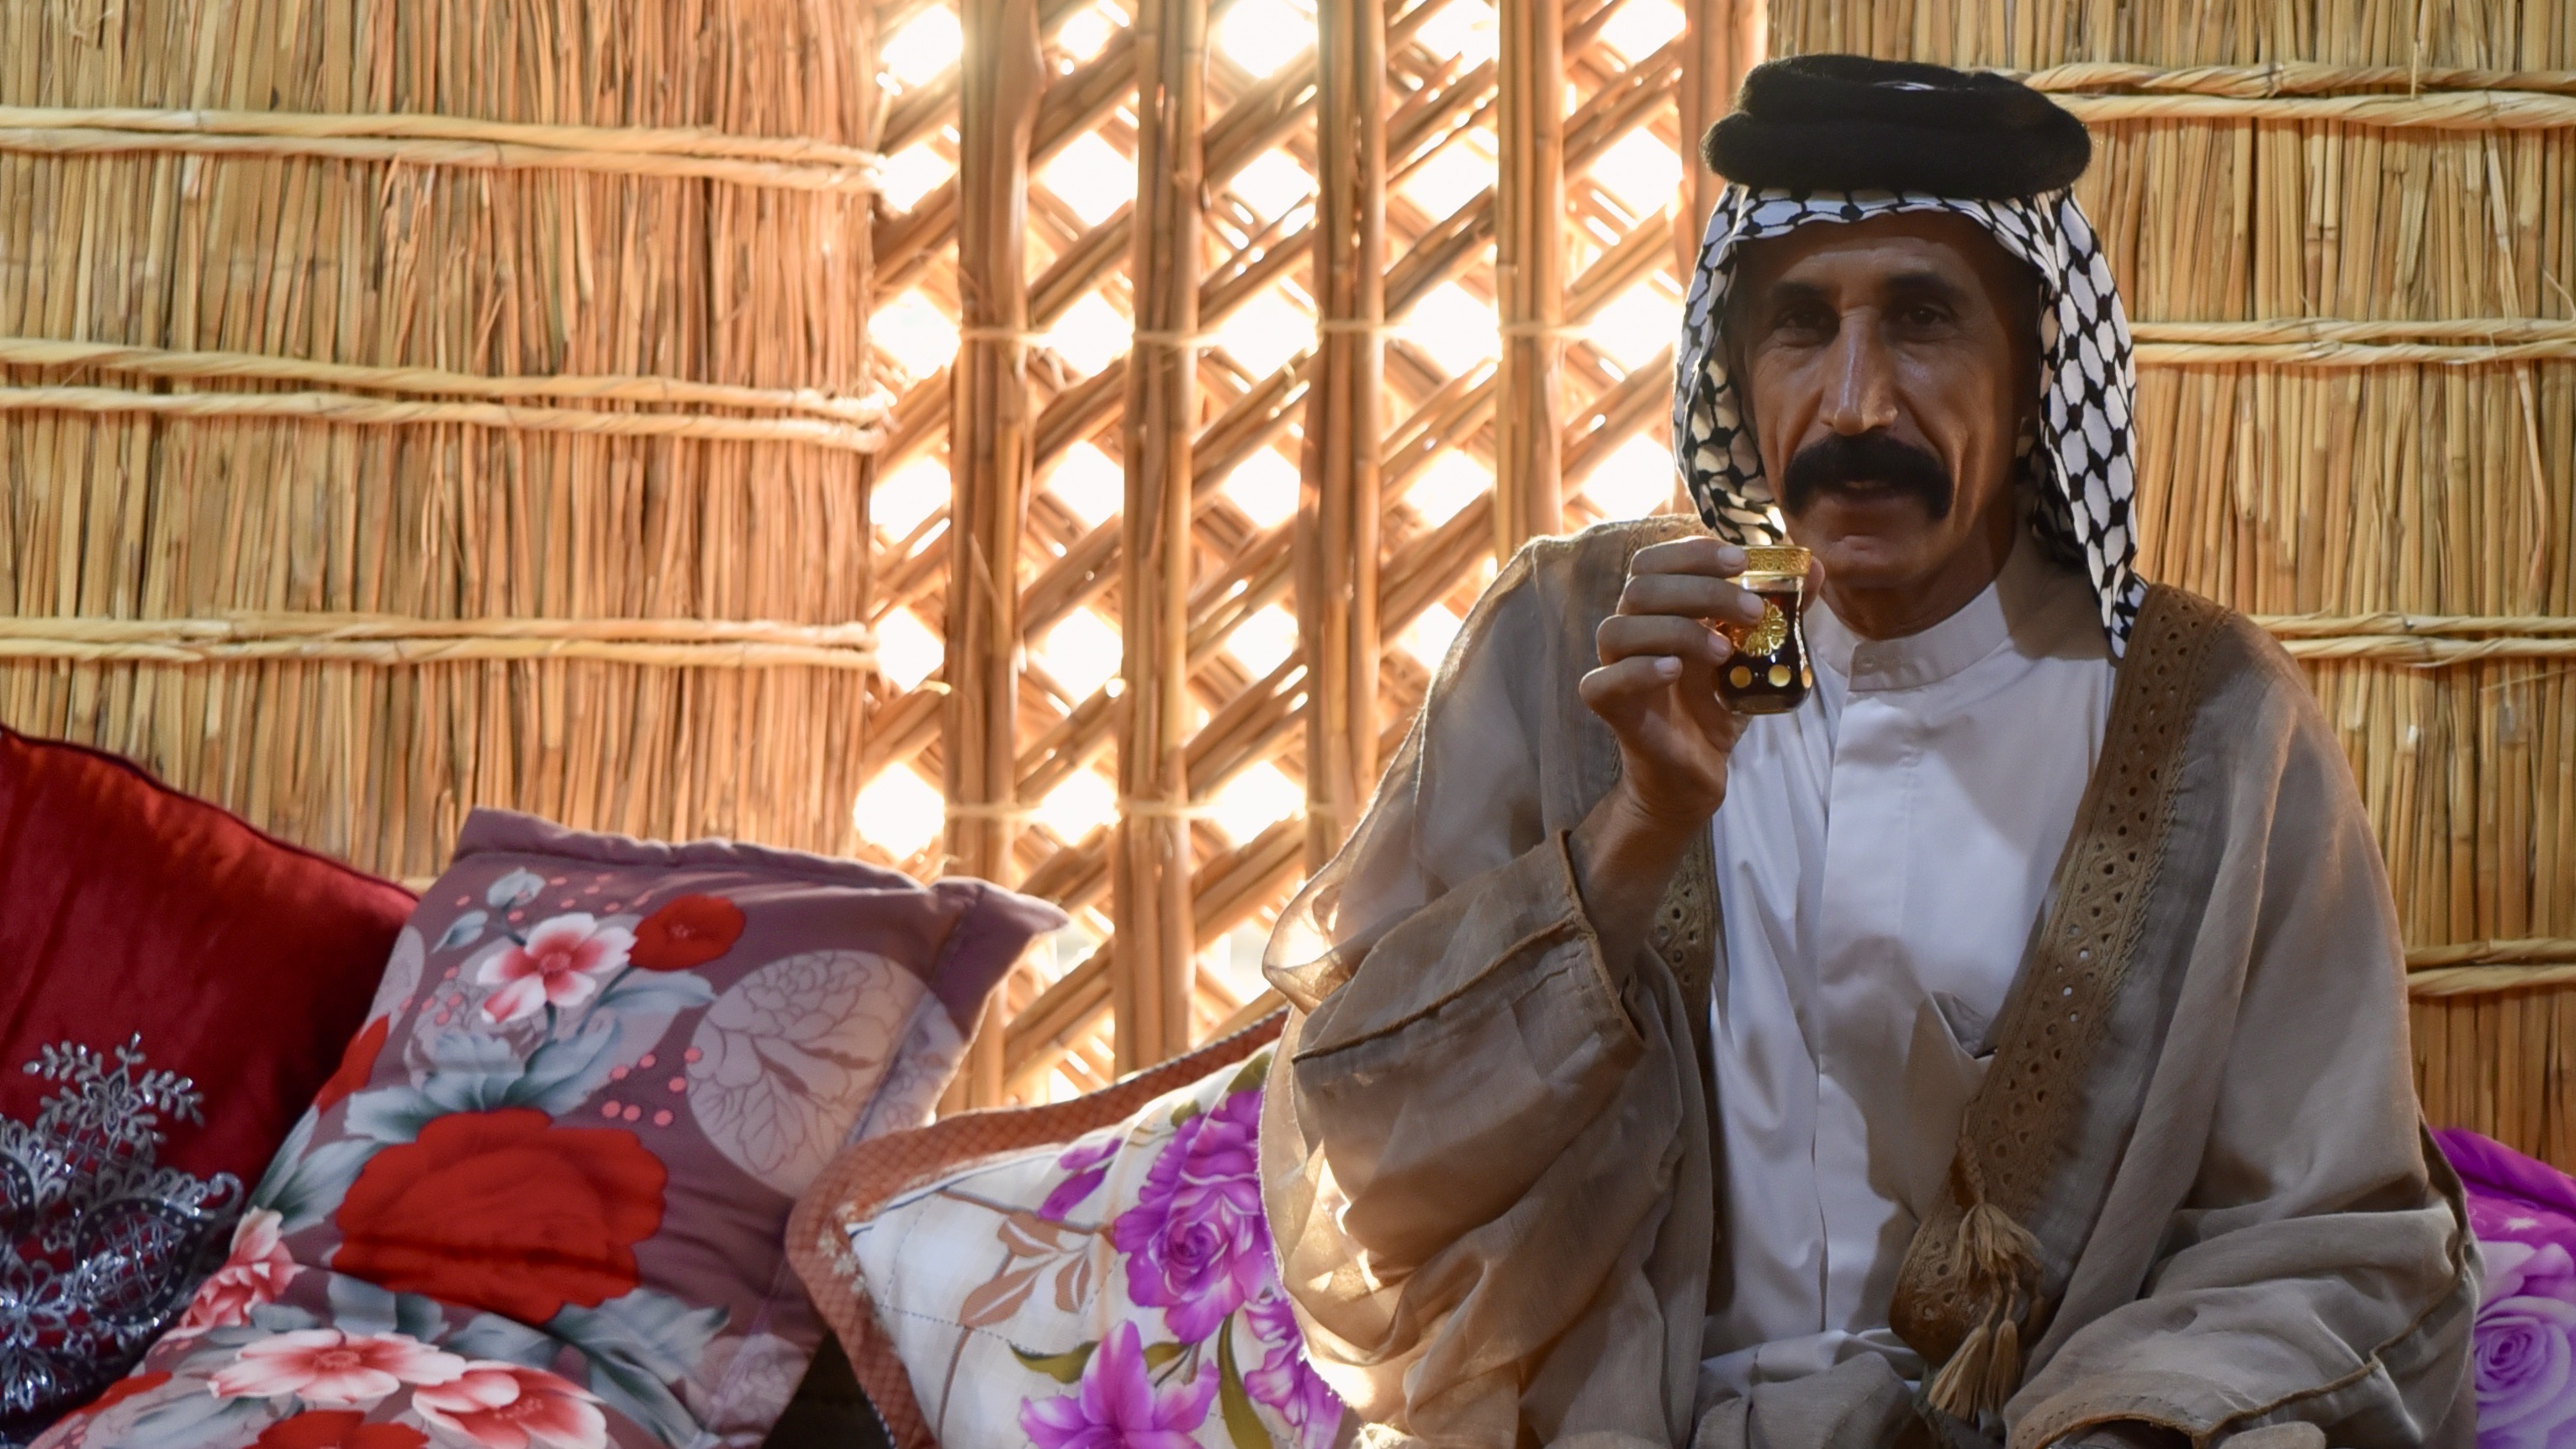 A Marsh Arab in traditional dress sips tea from a glass in a mudhif